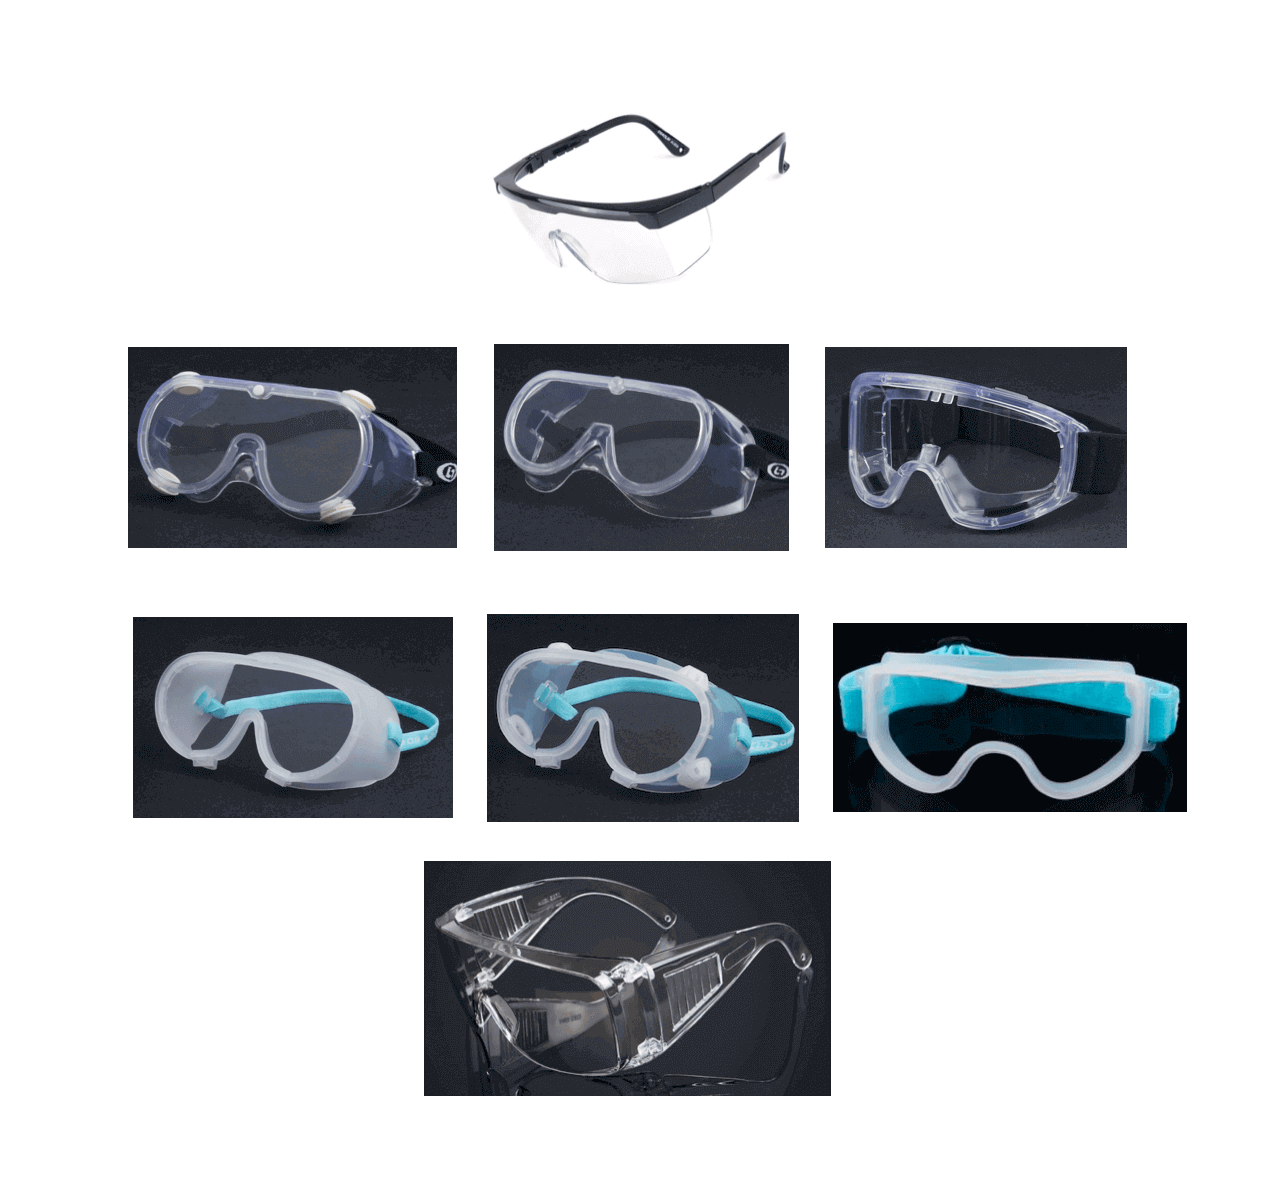 safety goggles - safety glasses - Medical Goggles - Protective eyewear - safety goggles supplier - Safety Glasses Wholesale China, wholesale safety glasses, plastic safety glasses wholesale, wholesale safety glasses bulk, safety eyewear manufacturers, safety goggles suppliers, safety glasses bulk buy, plastic safety glasses wholesale, Safety Glasses Wholesale China, wholesale safety glasses, plastic safety glasses wholesale, wholesale safety glasses bulk, safety eyewear manufacturers, safety goggles suppliers, safety glasses bulk buy, plastic safety glasses wholesale